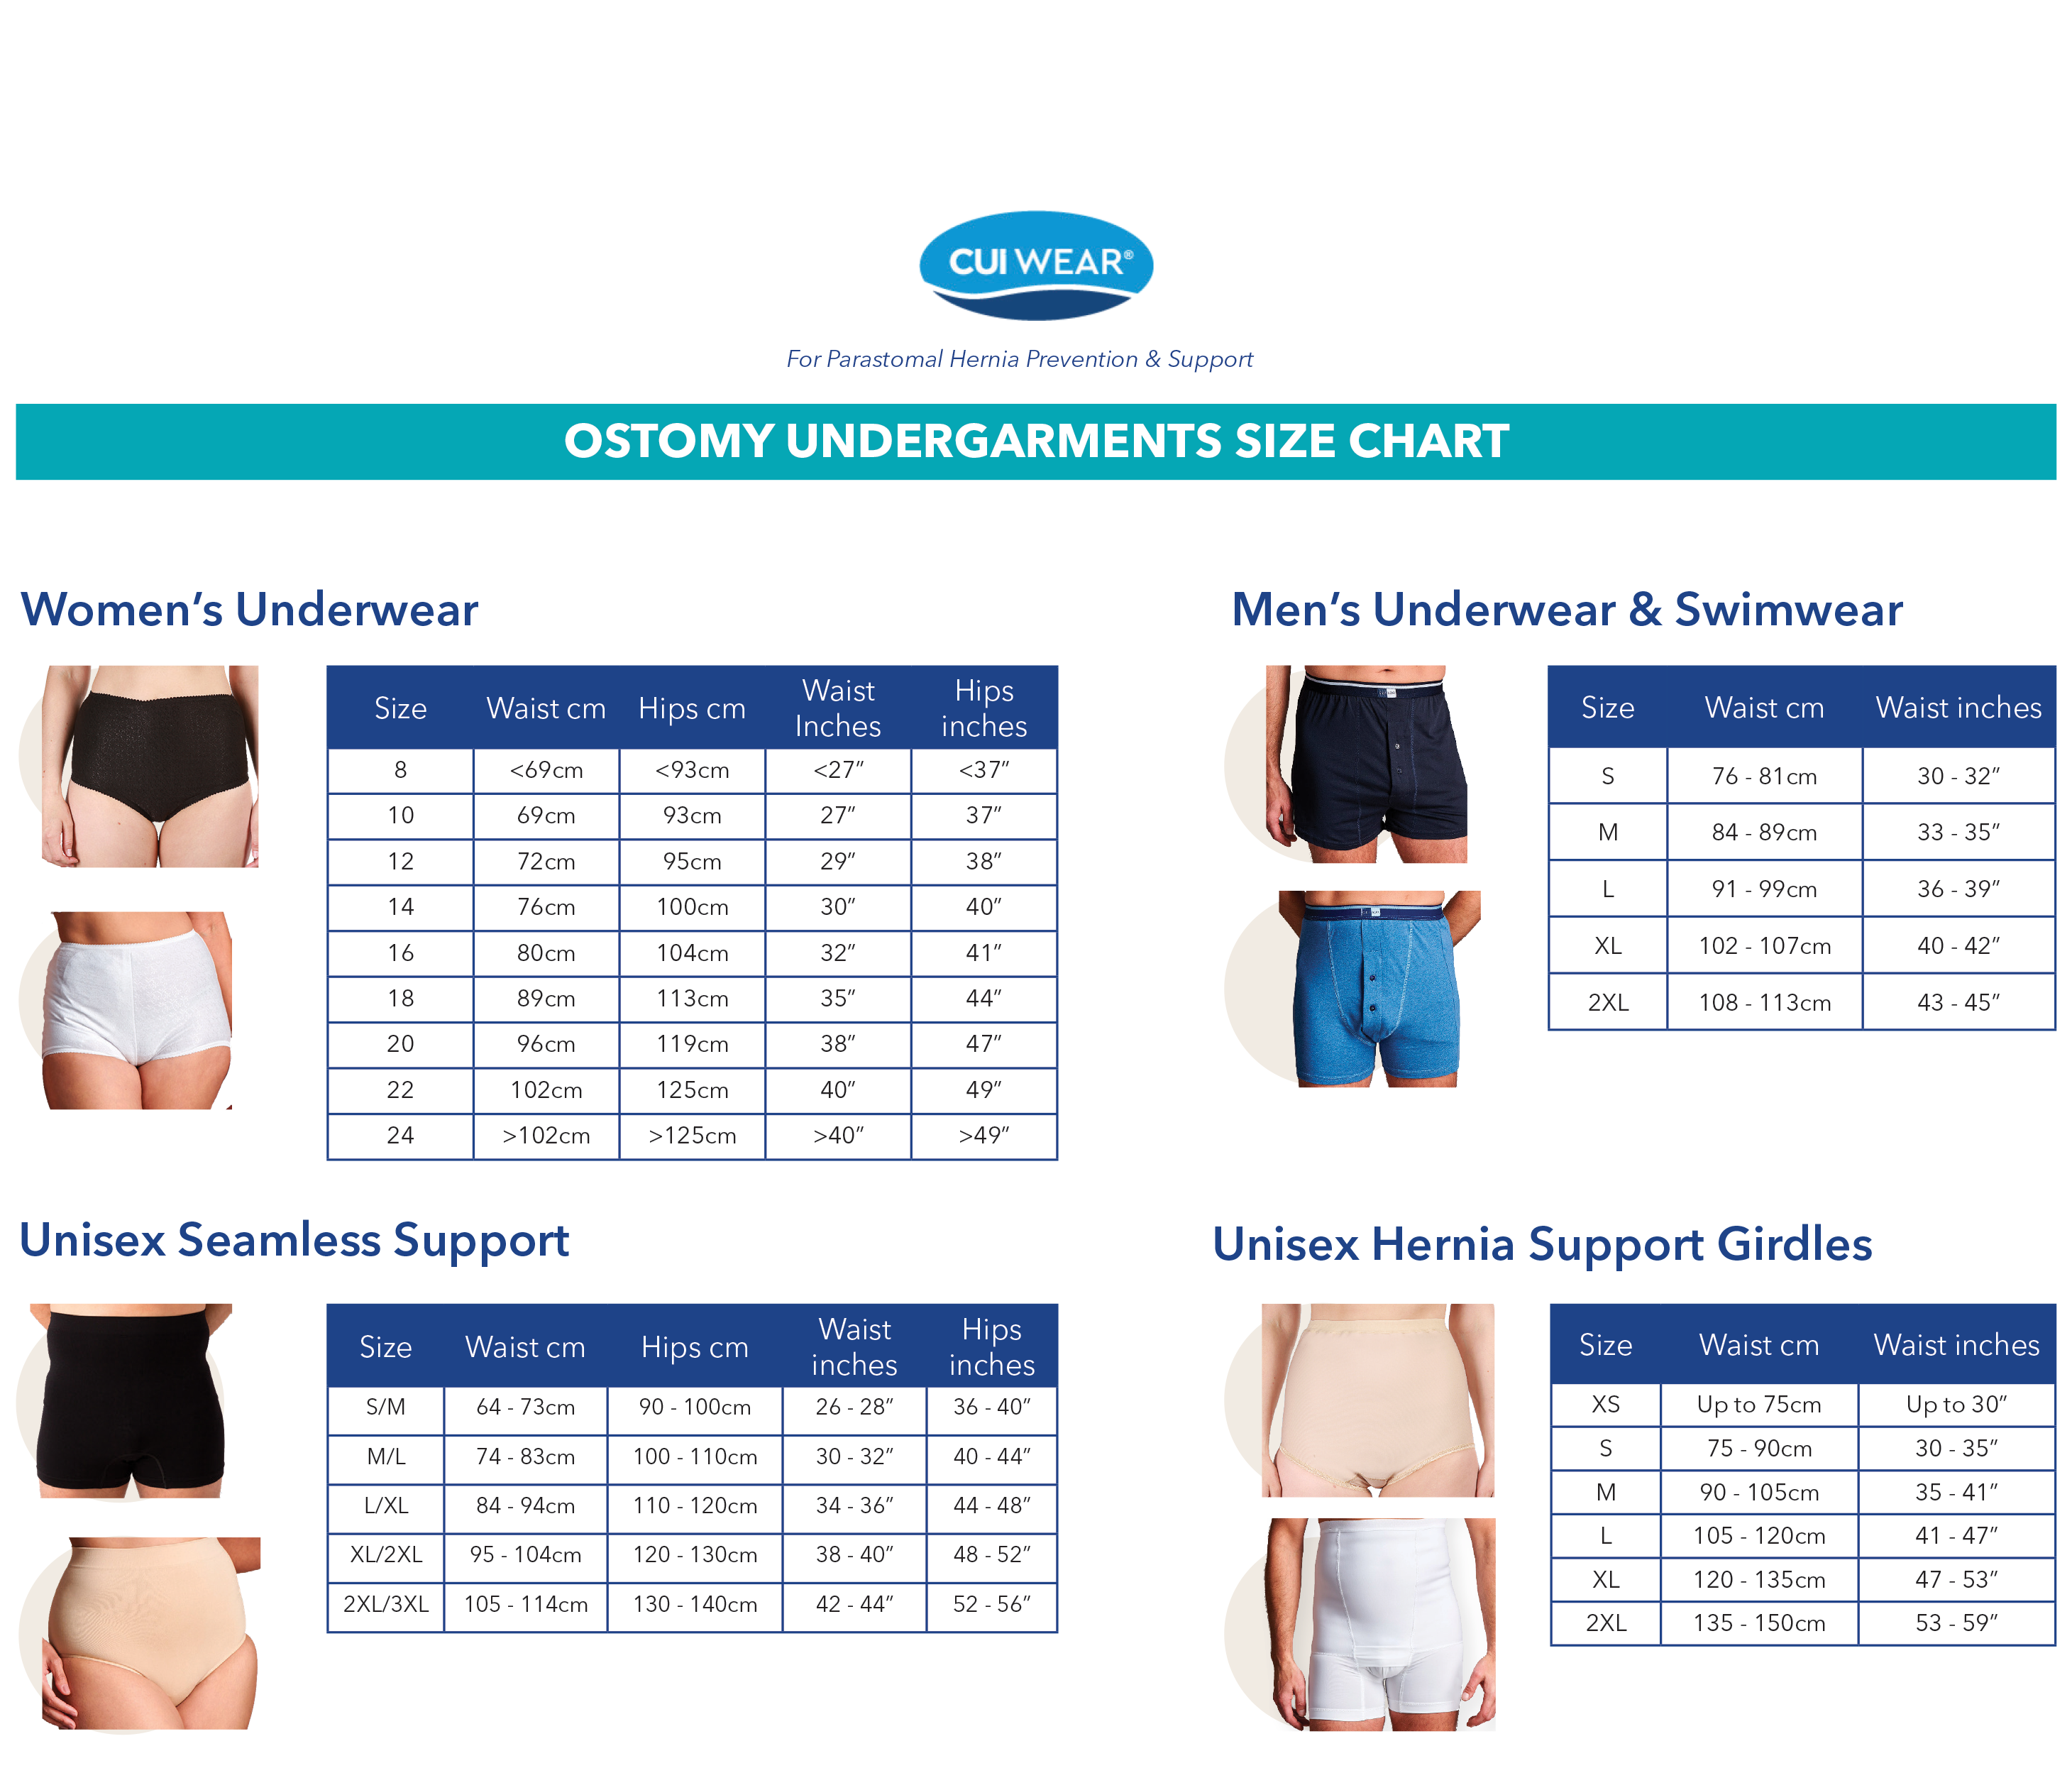 CUI Womens Ostomy Ultra-Lite Support Brief - 1 each, 8, WHITE - LEFT-3